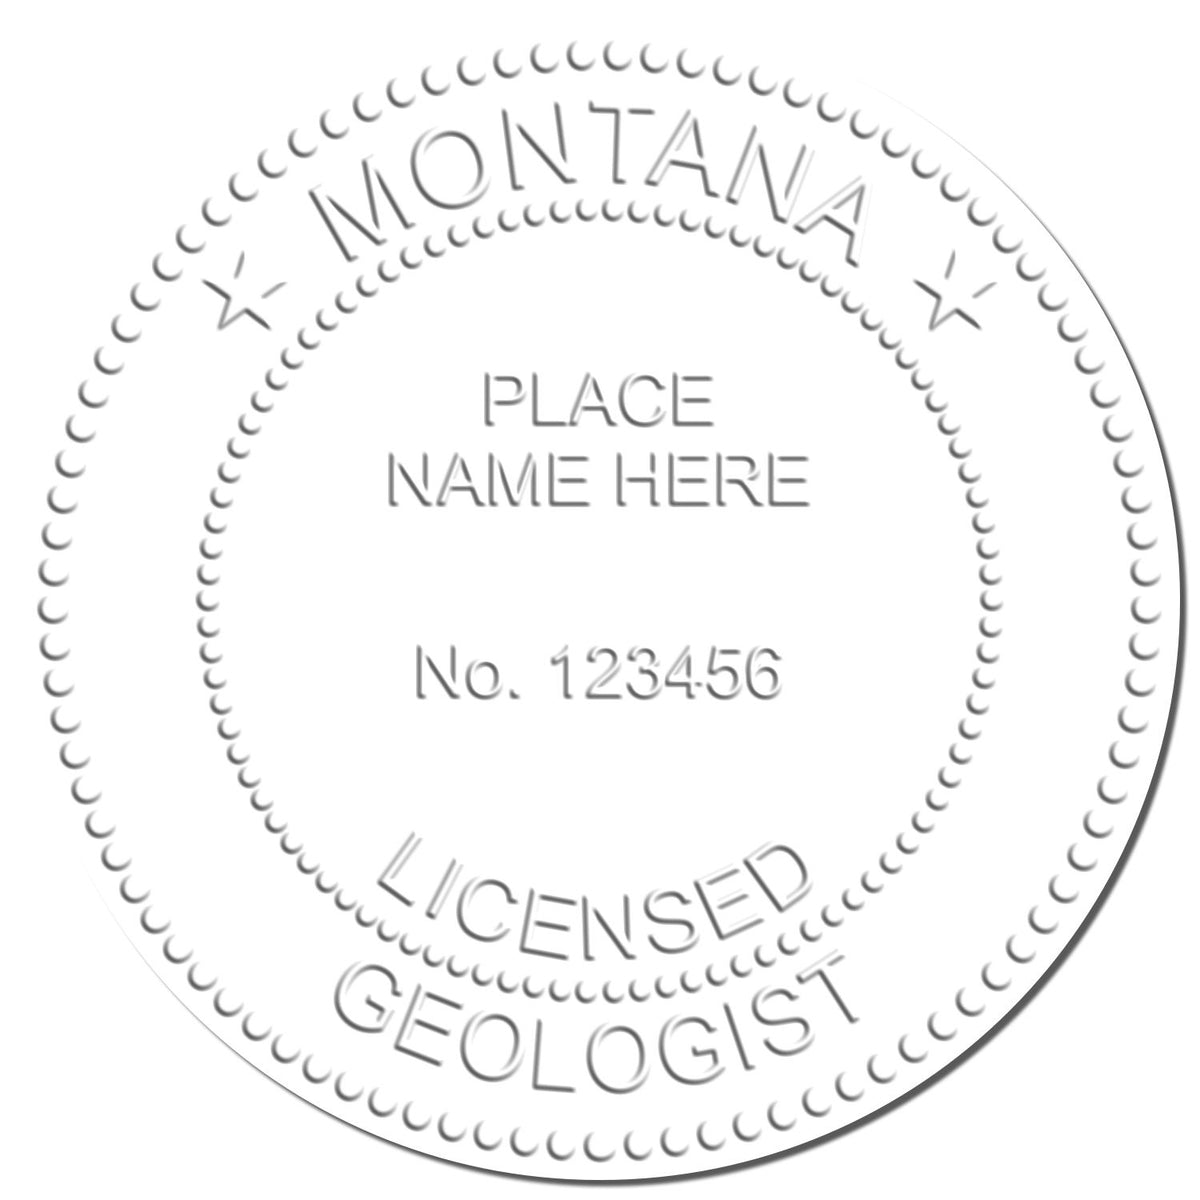 A photograph of the Hybrid Montana Geologist Seal stamp impression reveals a vivid, professional image of the on paper.